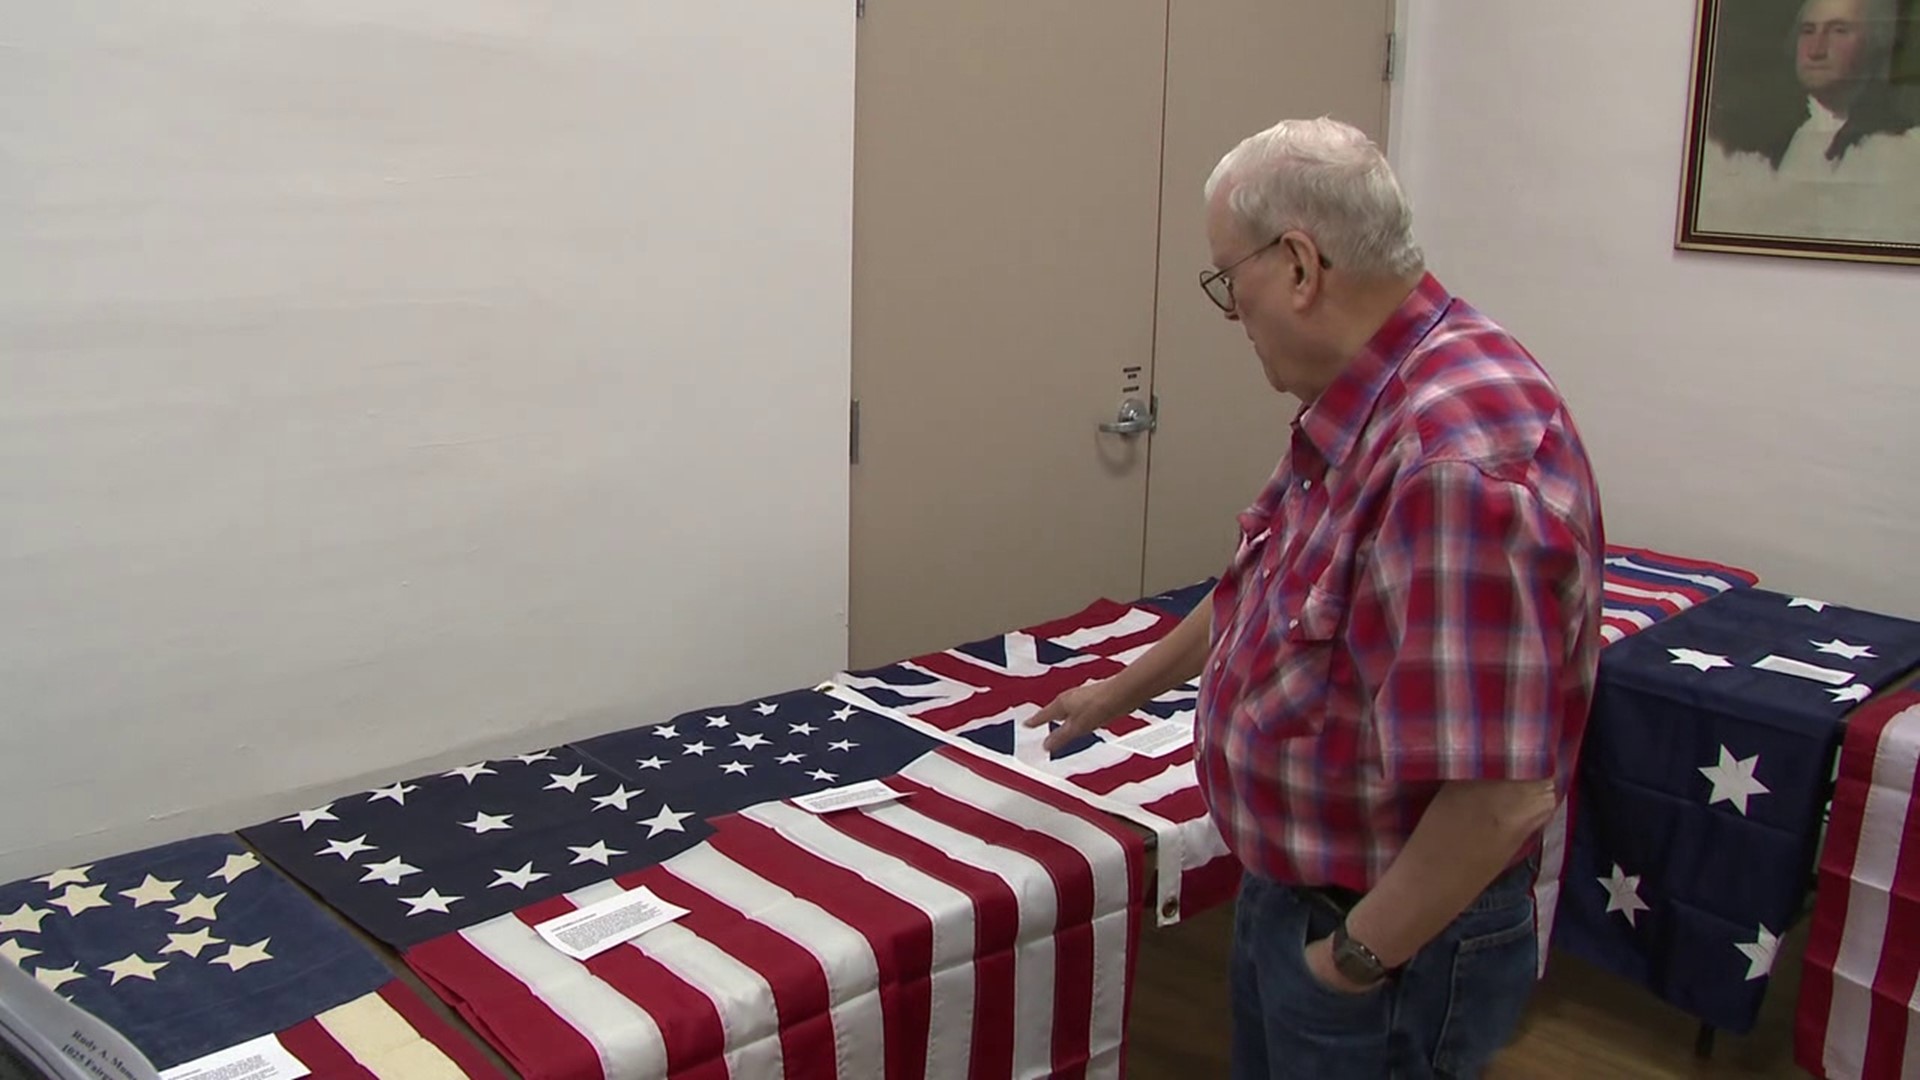 A man from Lewisburg has been collecting flags for 68 years, and now he has nearly 2,000 of them.